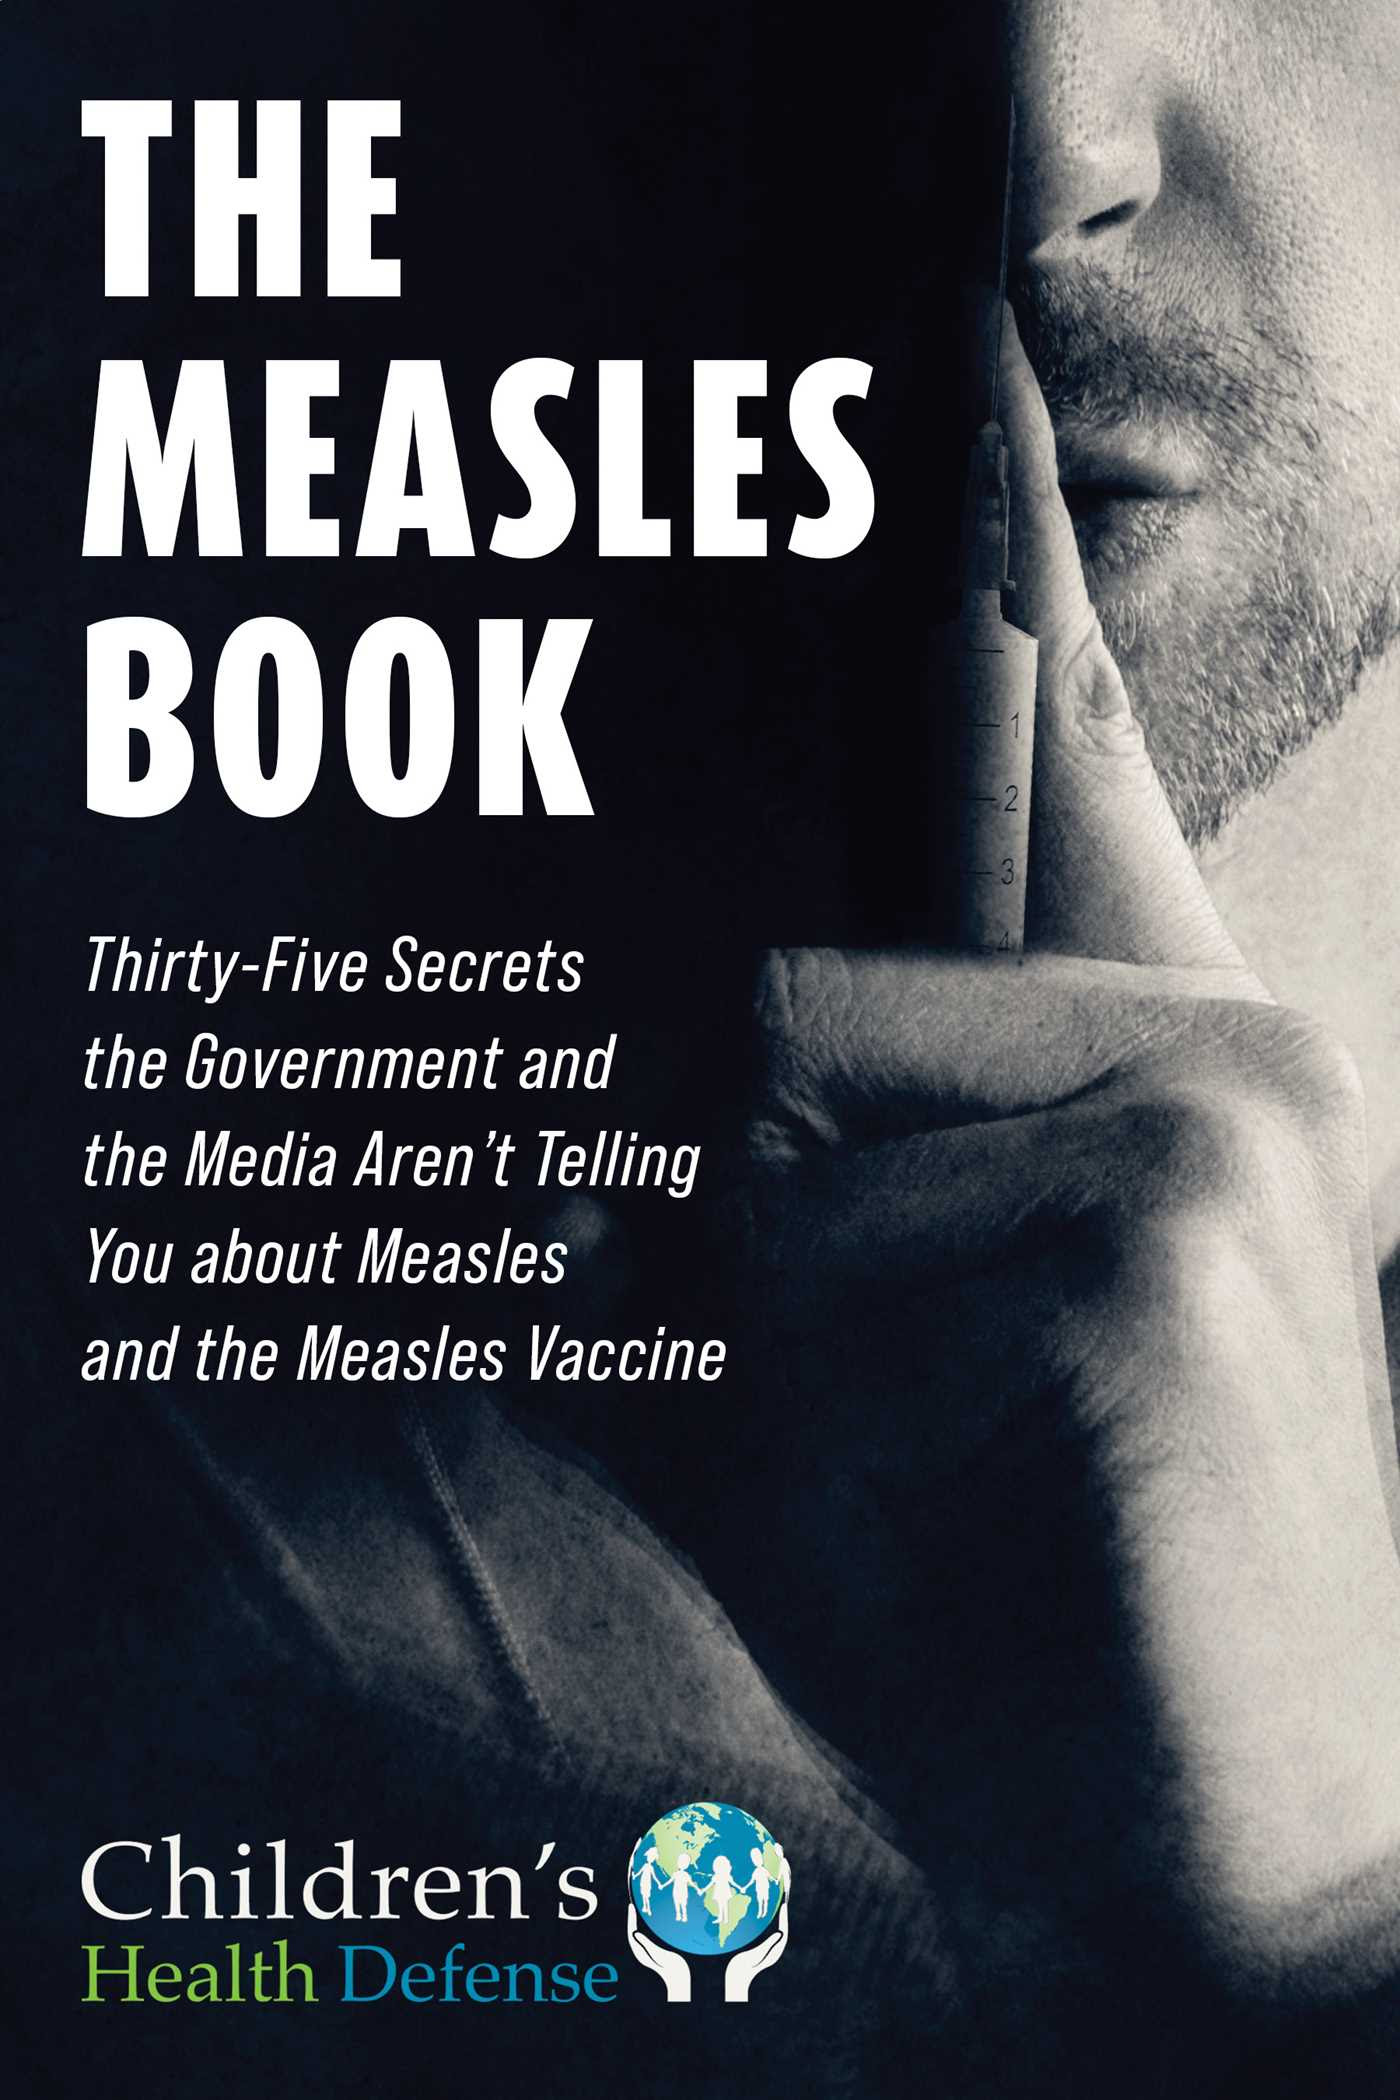 Measles Book: Thirty-Five Secrets the Government and the Media Aren't Telling You about Measles and the Measles Vaccine PDF